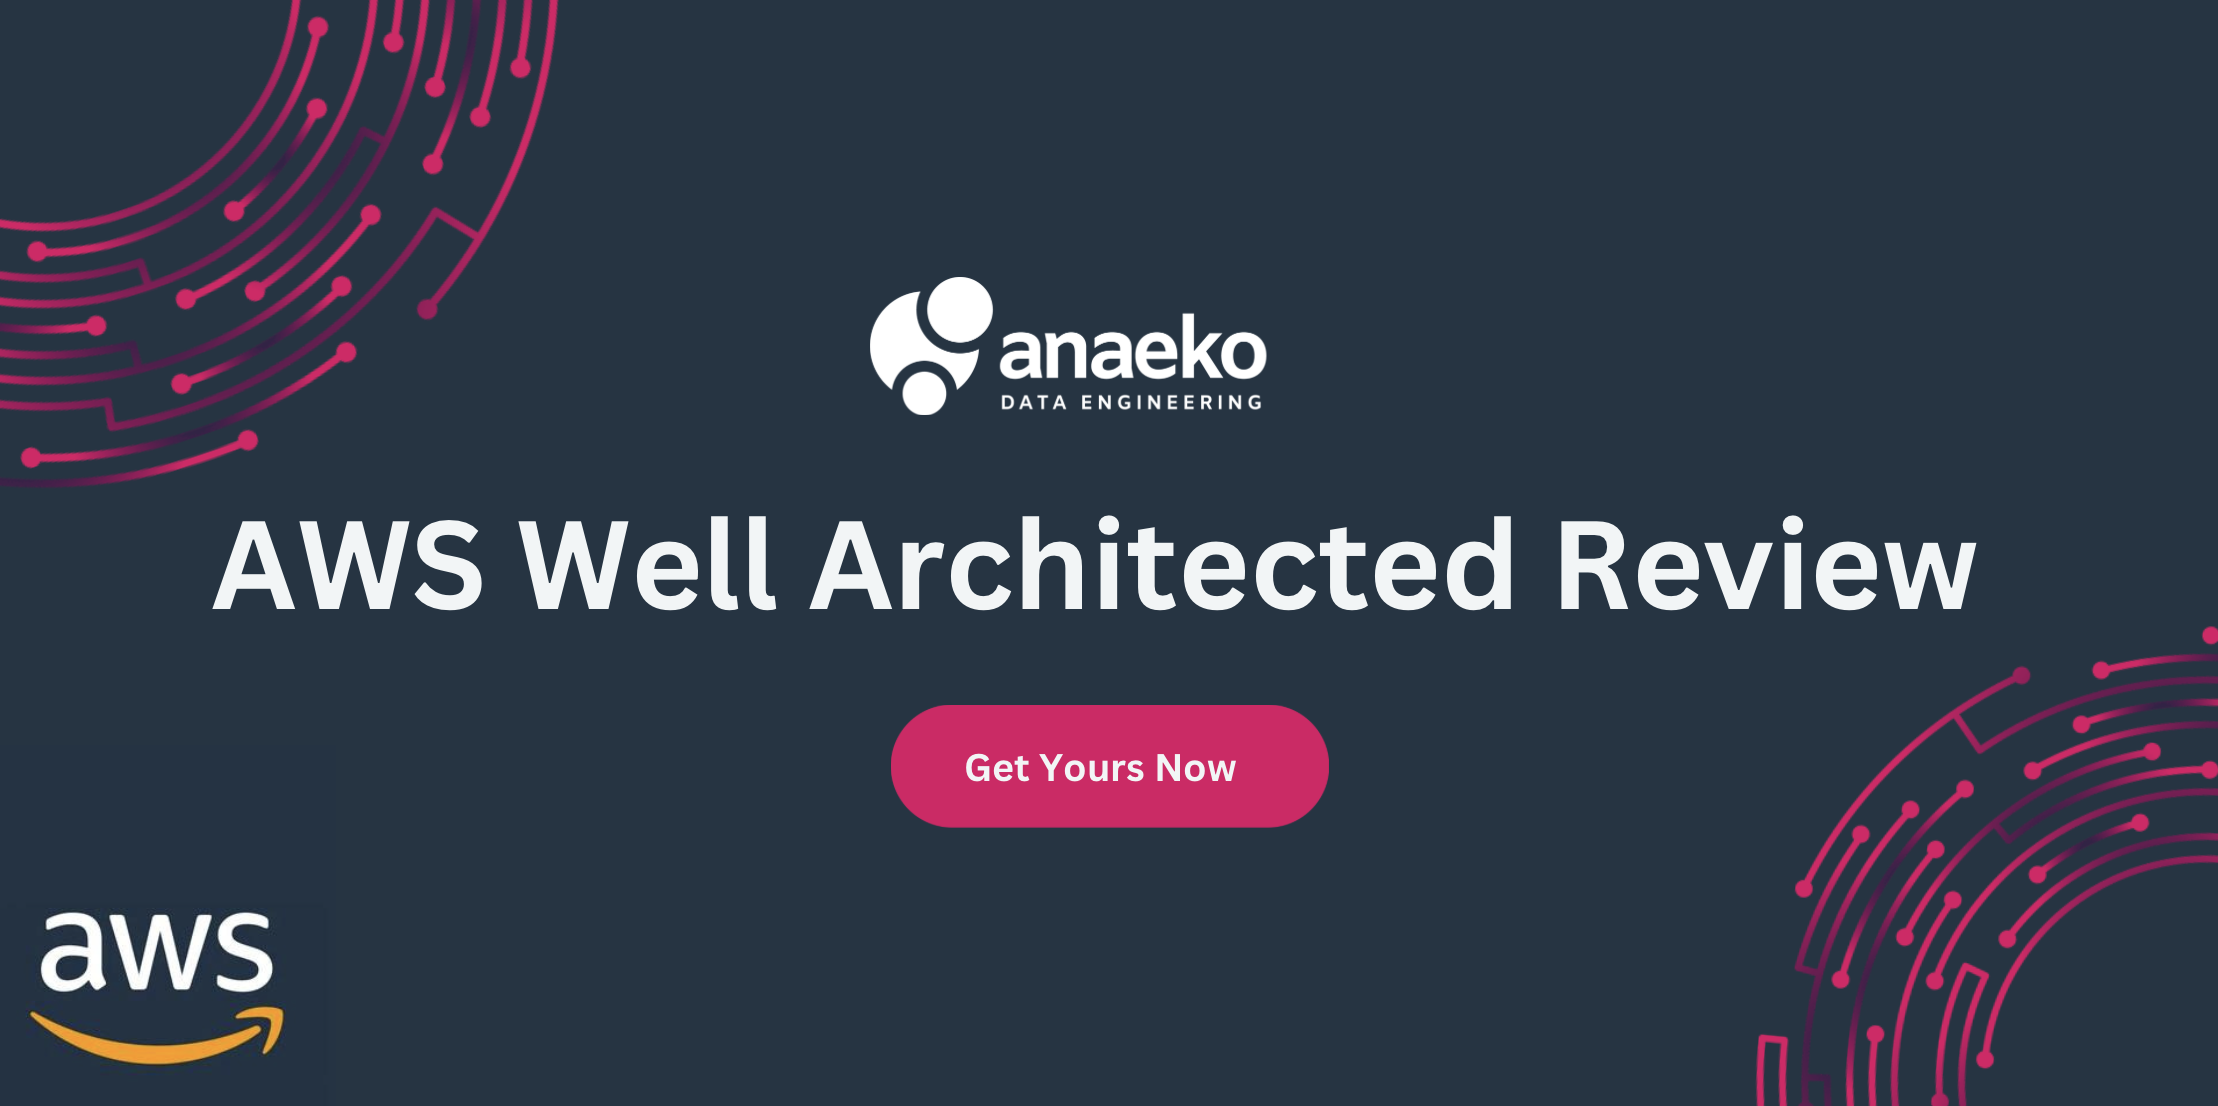 AWS Well-Architected Review from Anaeko